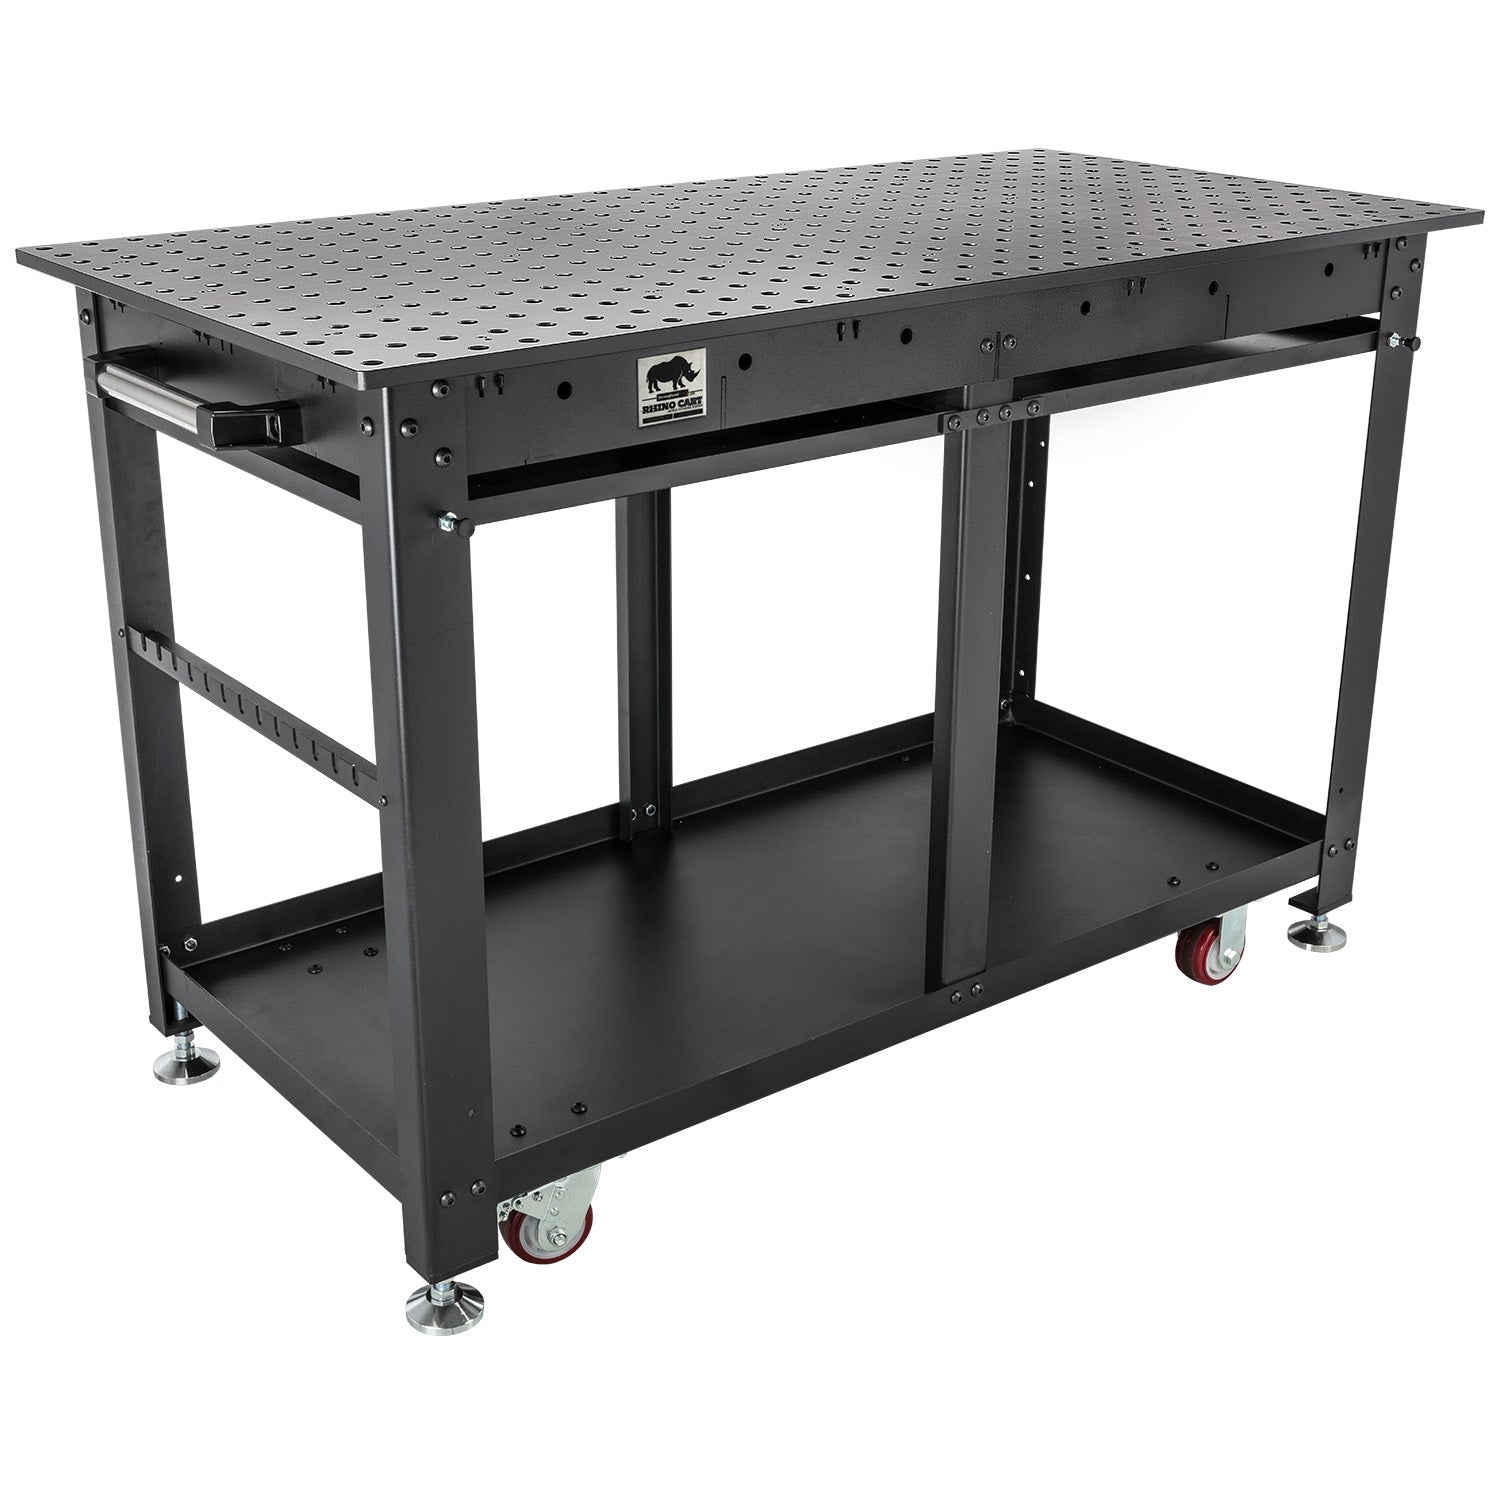 Rhino Cart Mobile Fixturing Station, Mobile Welding Table